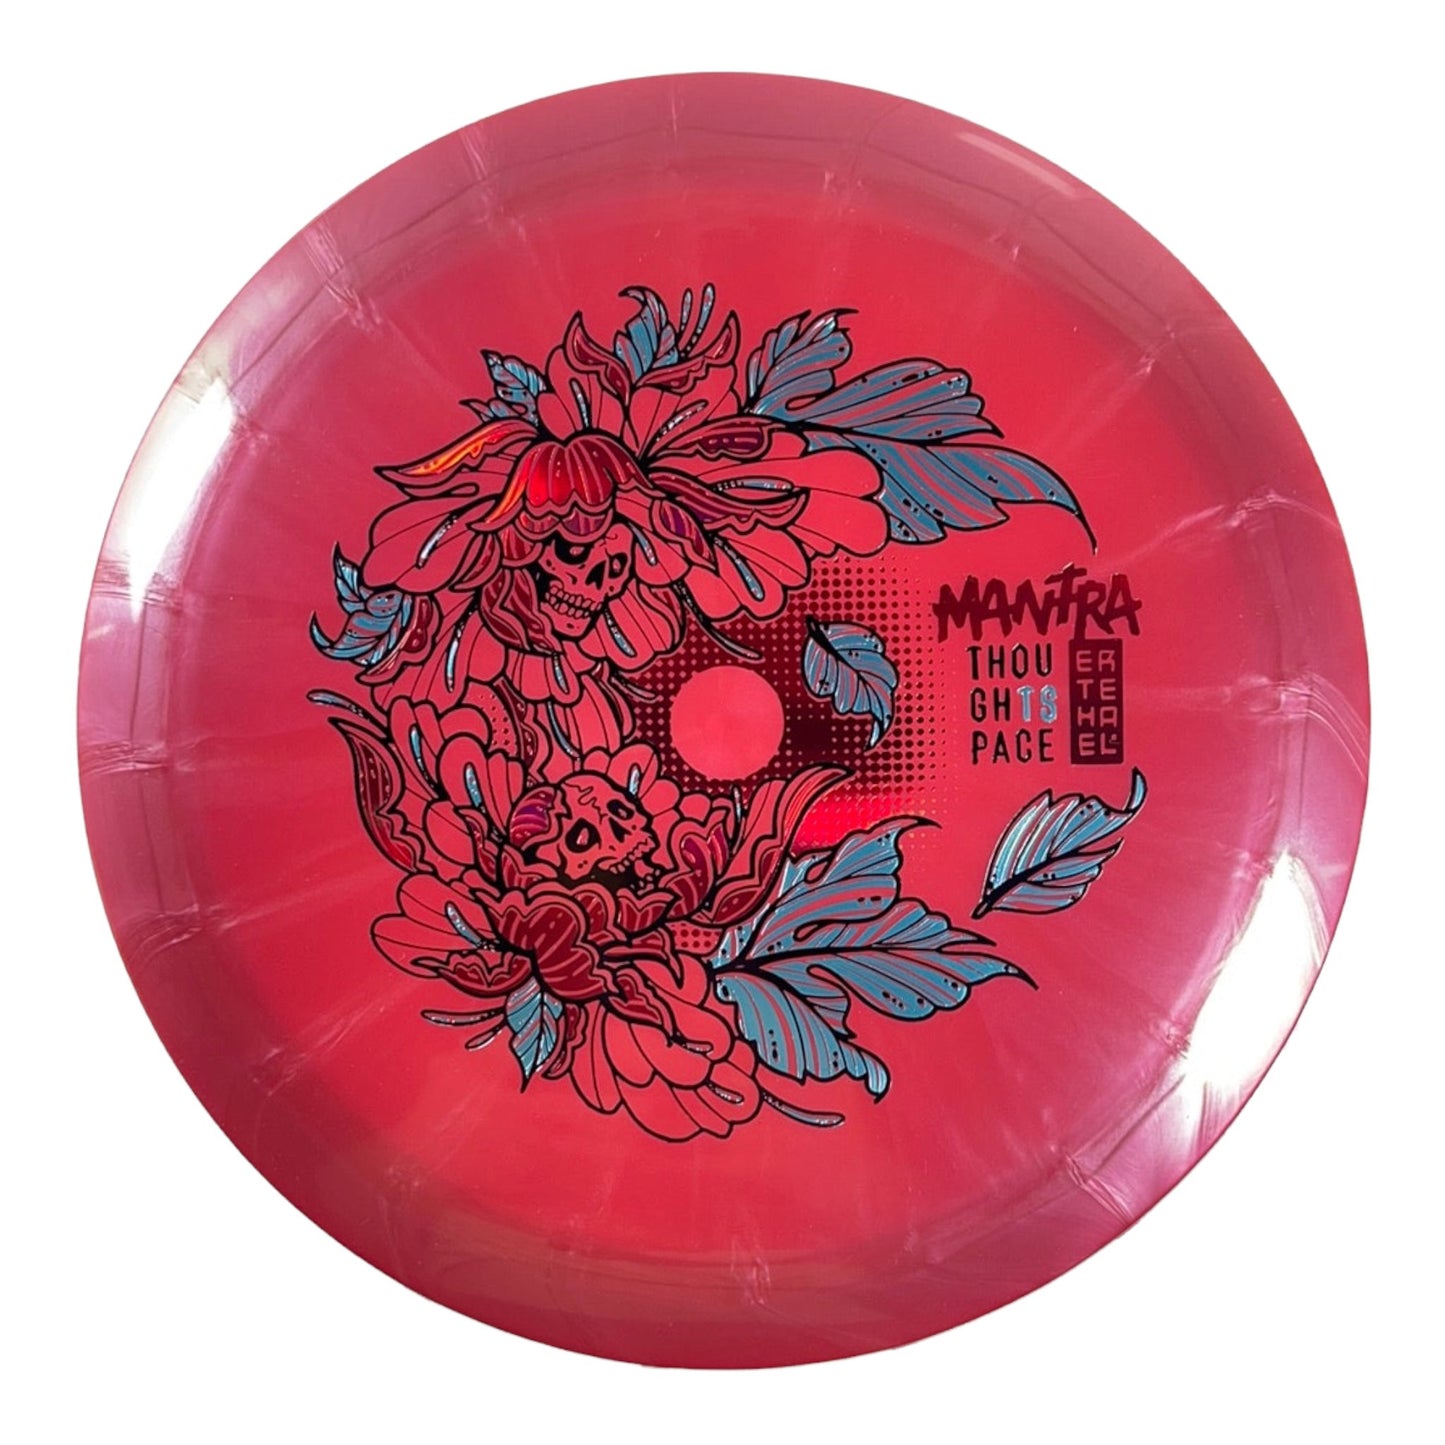 Thought Space Athletics Mantra | Ethereal | Red/Blue 175g Disc Golf